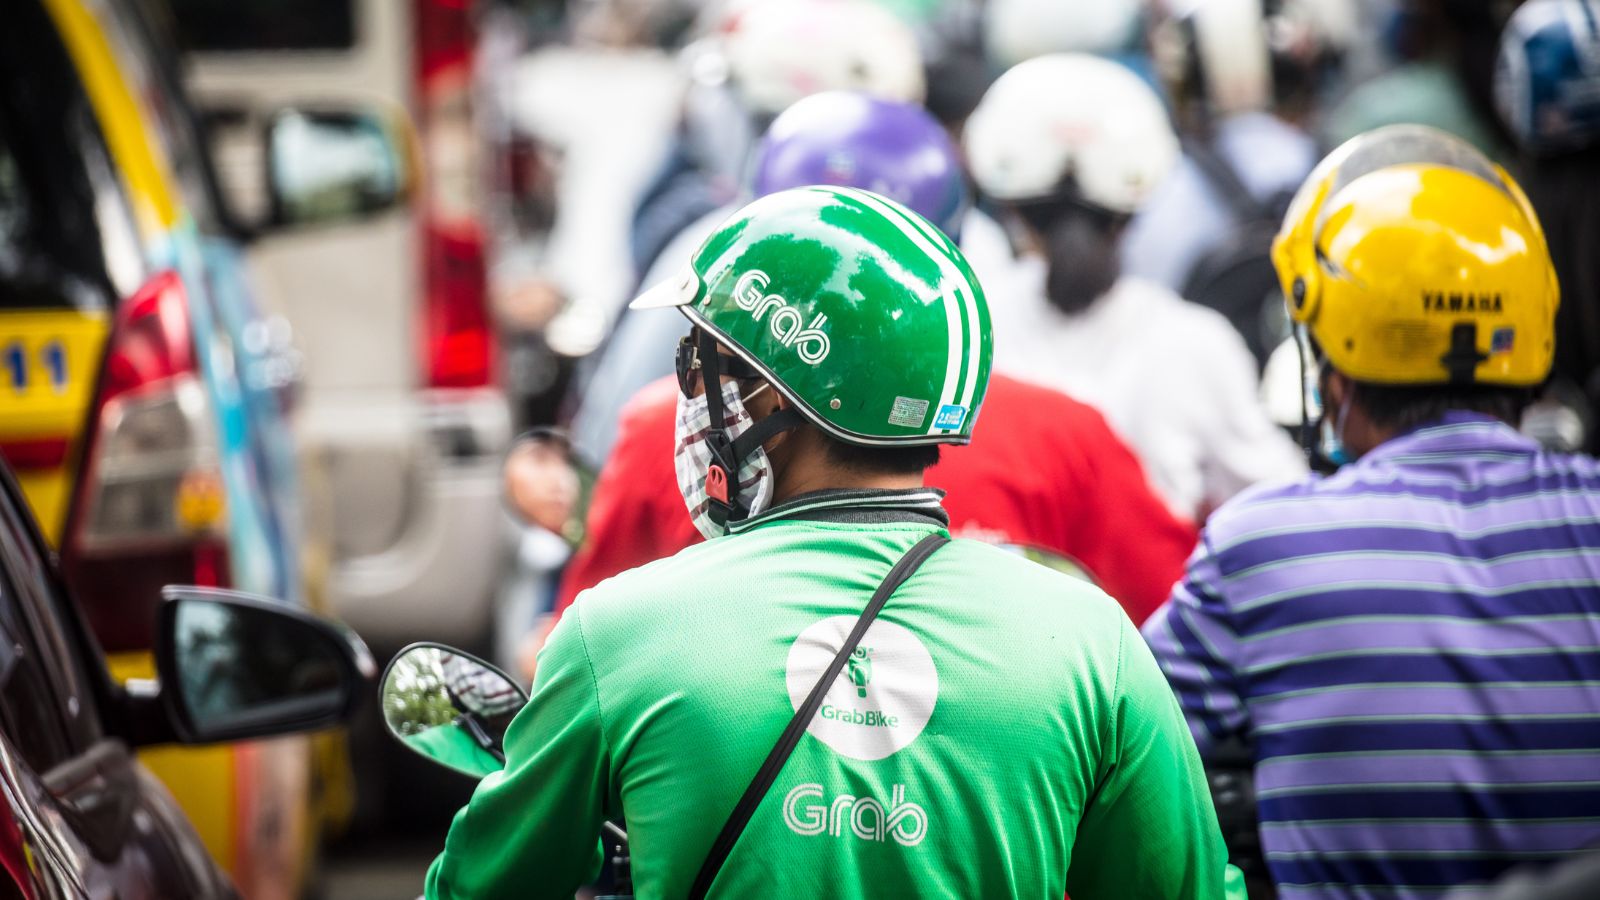 Grab Is Quite Popular In Ho Chi Minh City